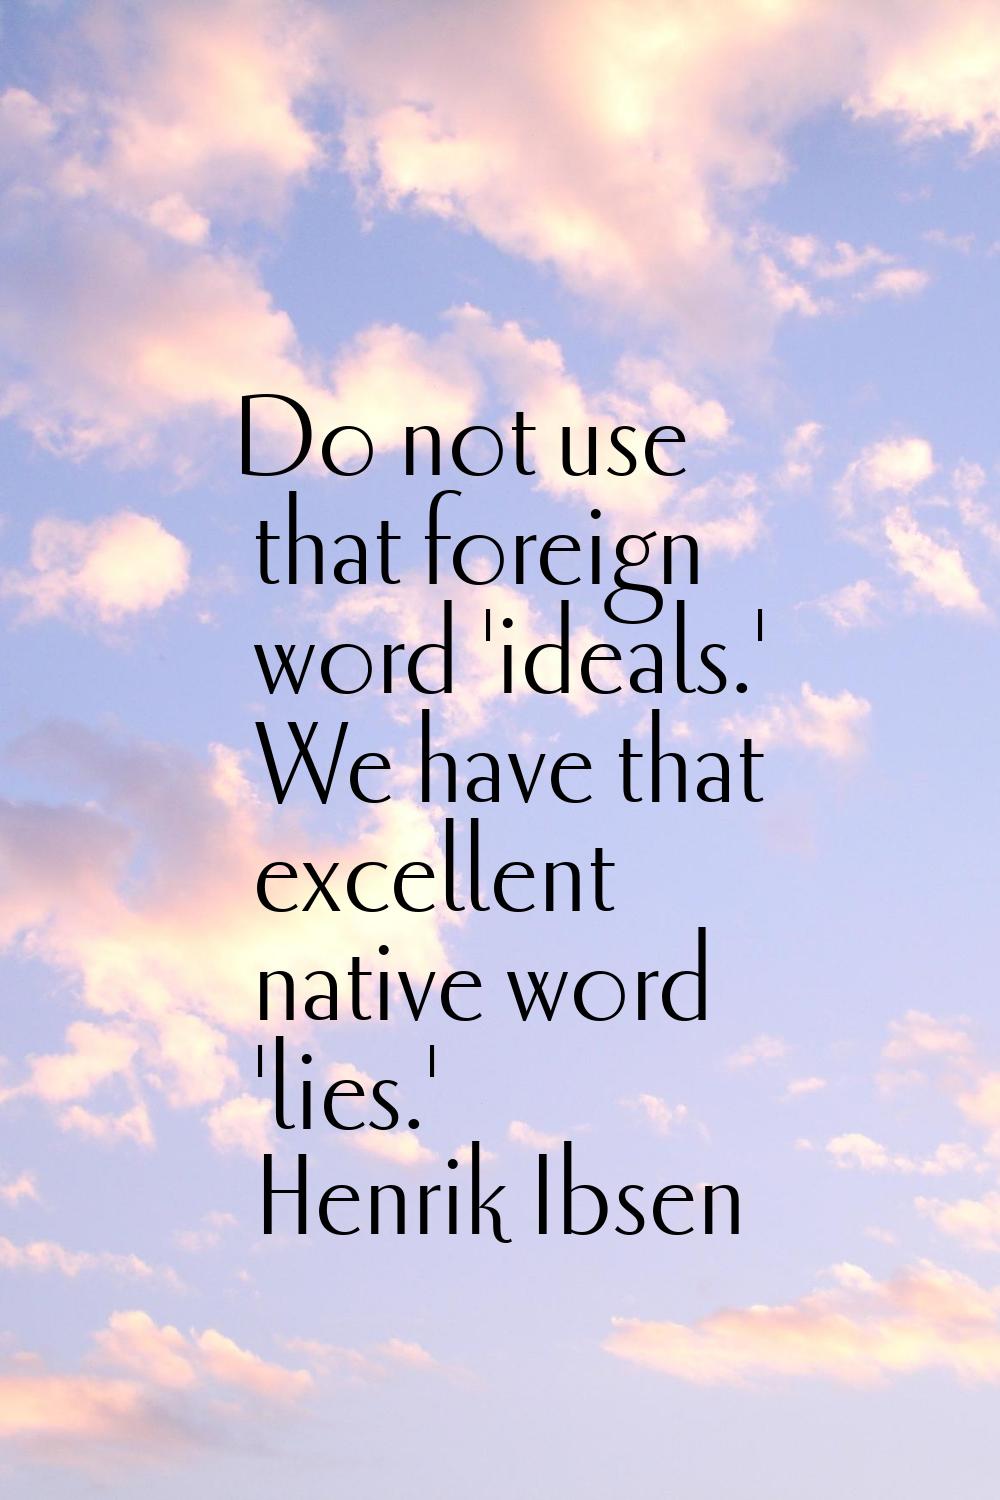 Do not use that foreign word 'ideals.' We have that excellent native word 'lies.'